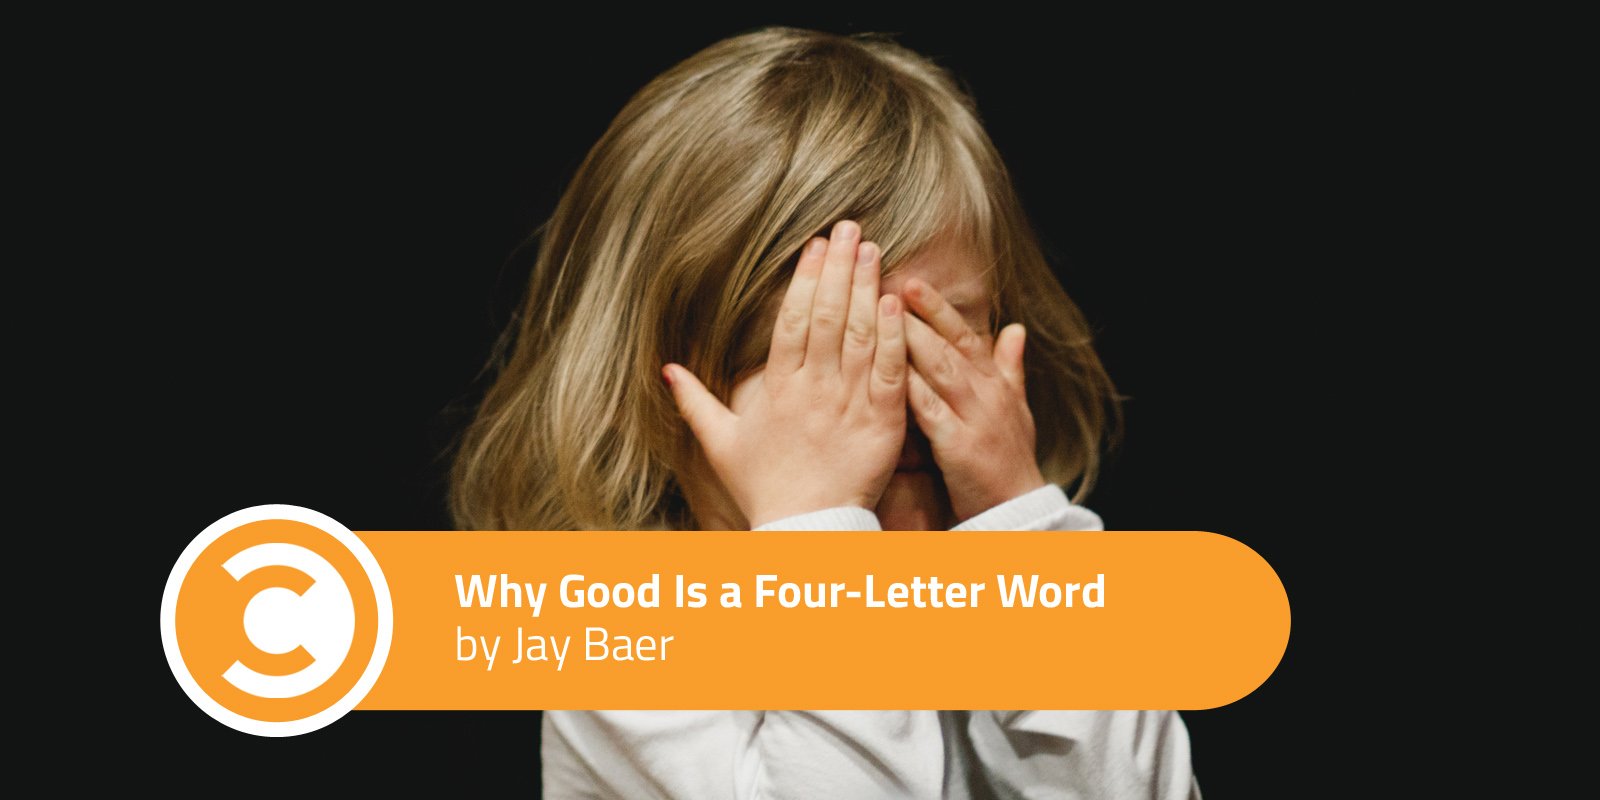 Why Good Is a Four-Letter Word